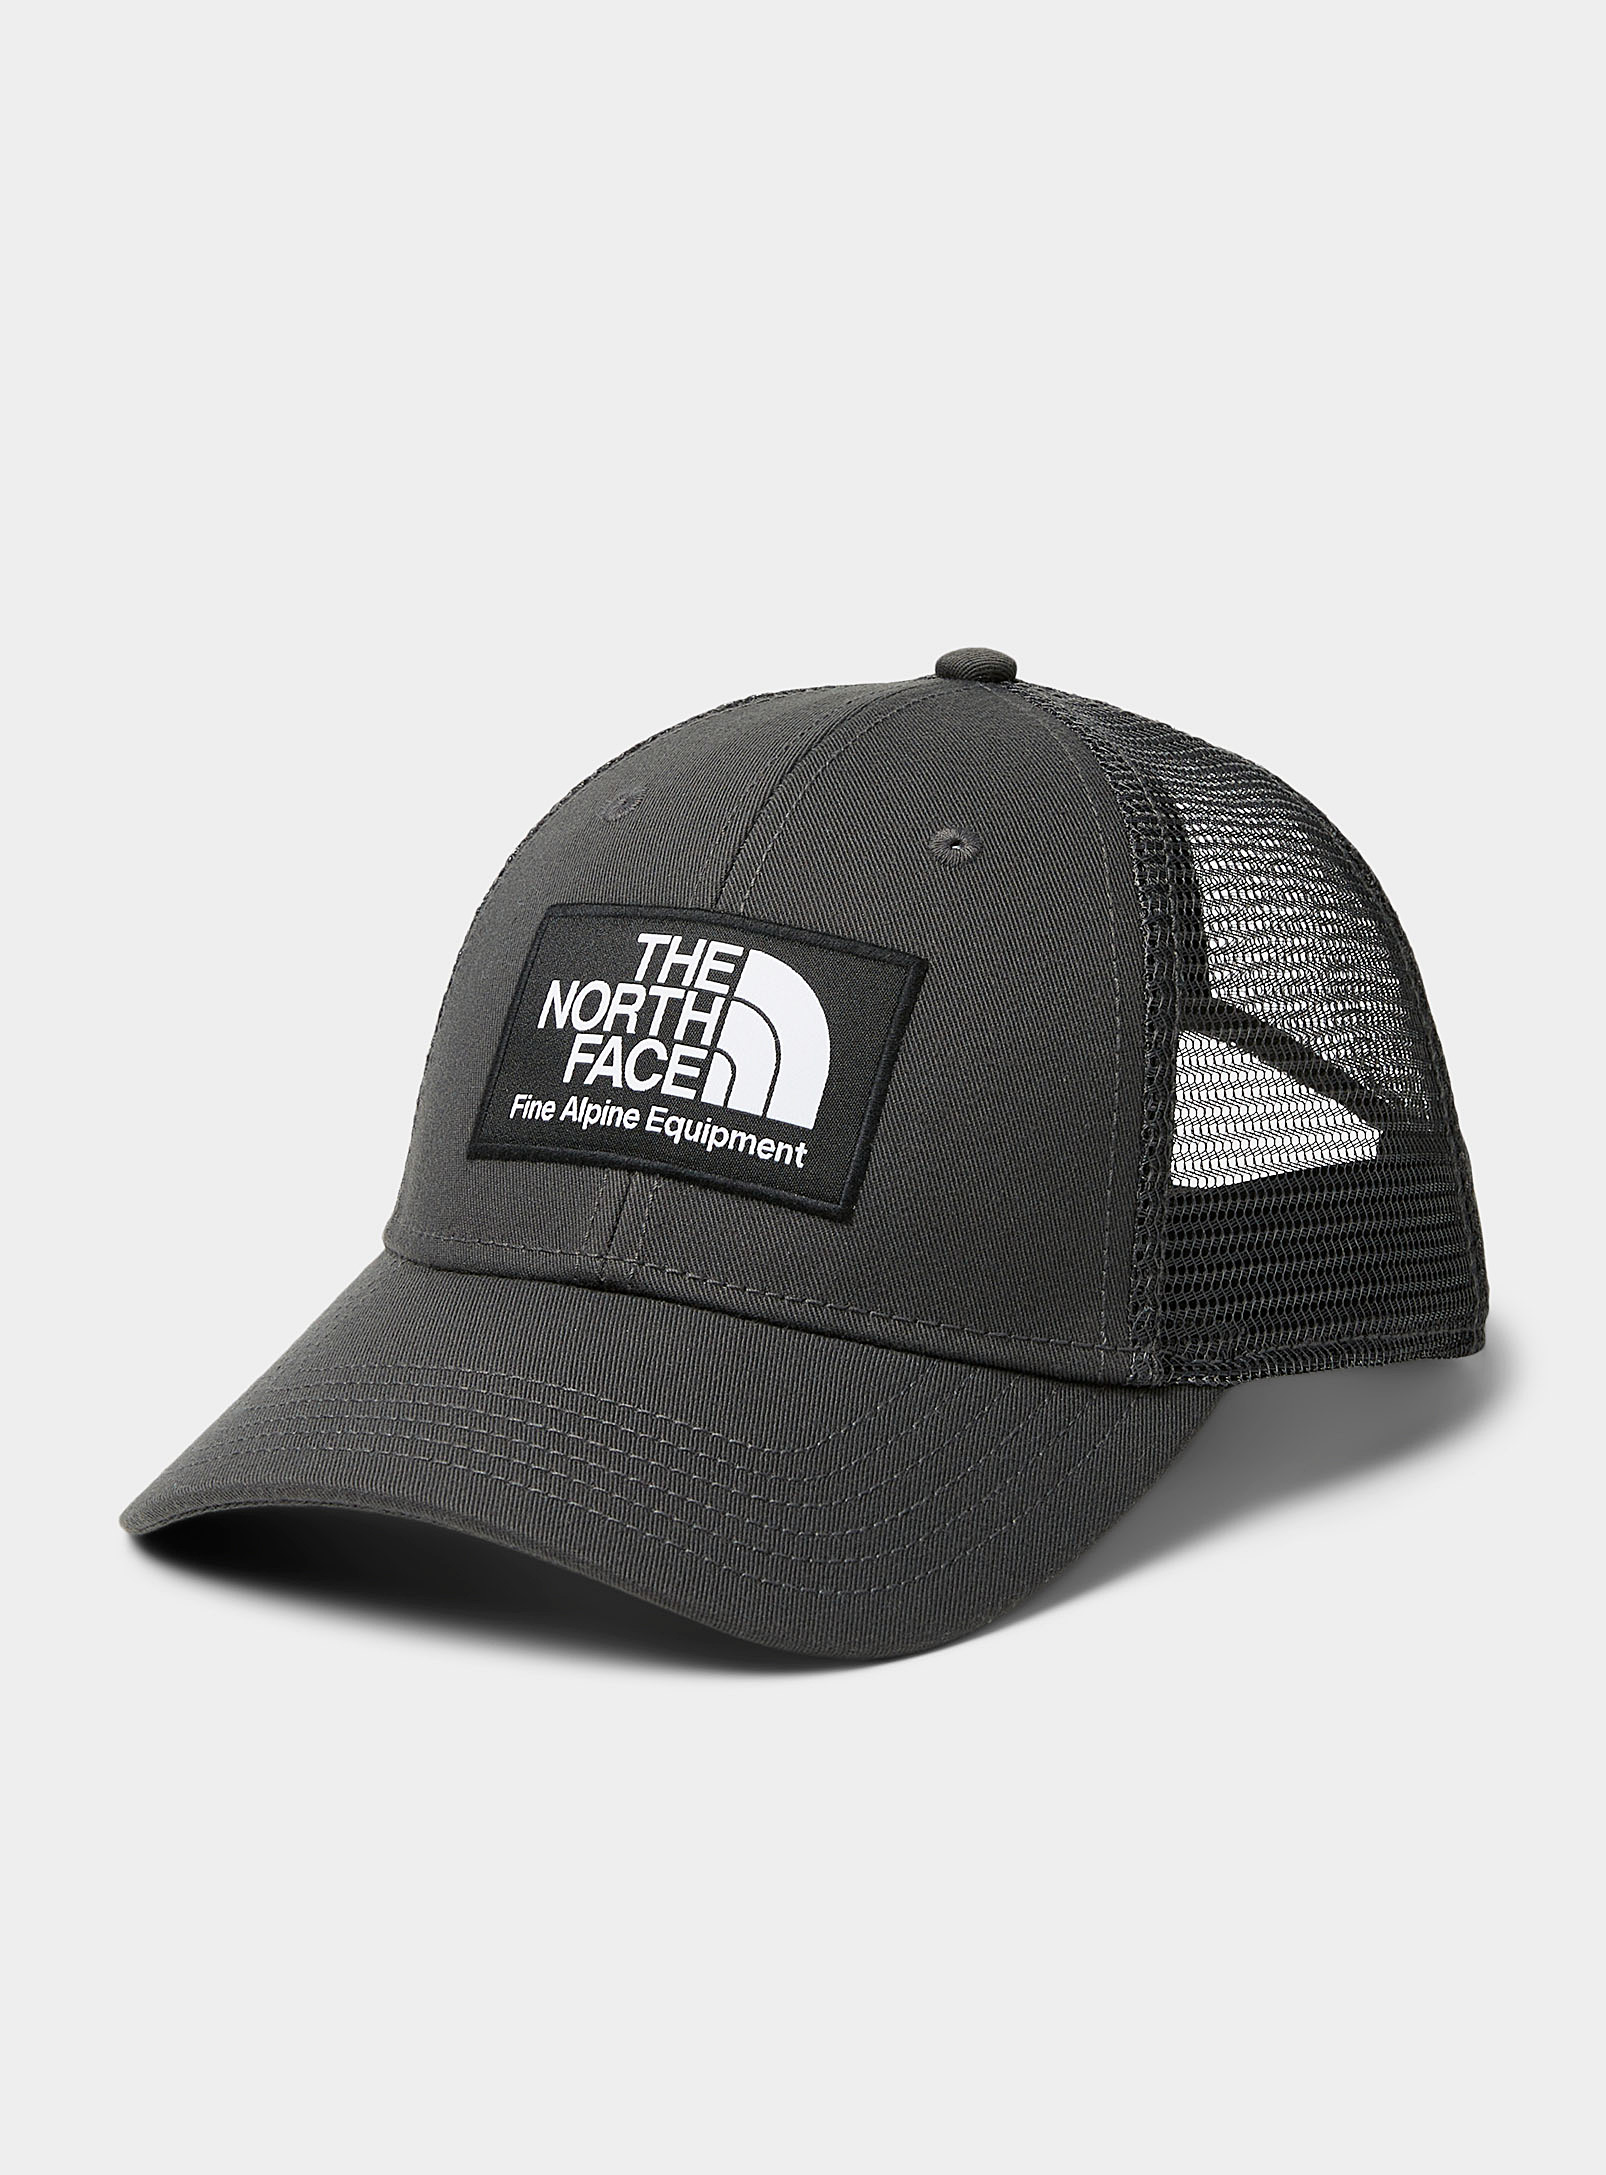 The North Face Mudder Trucker Cap In Fawn